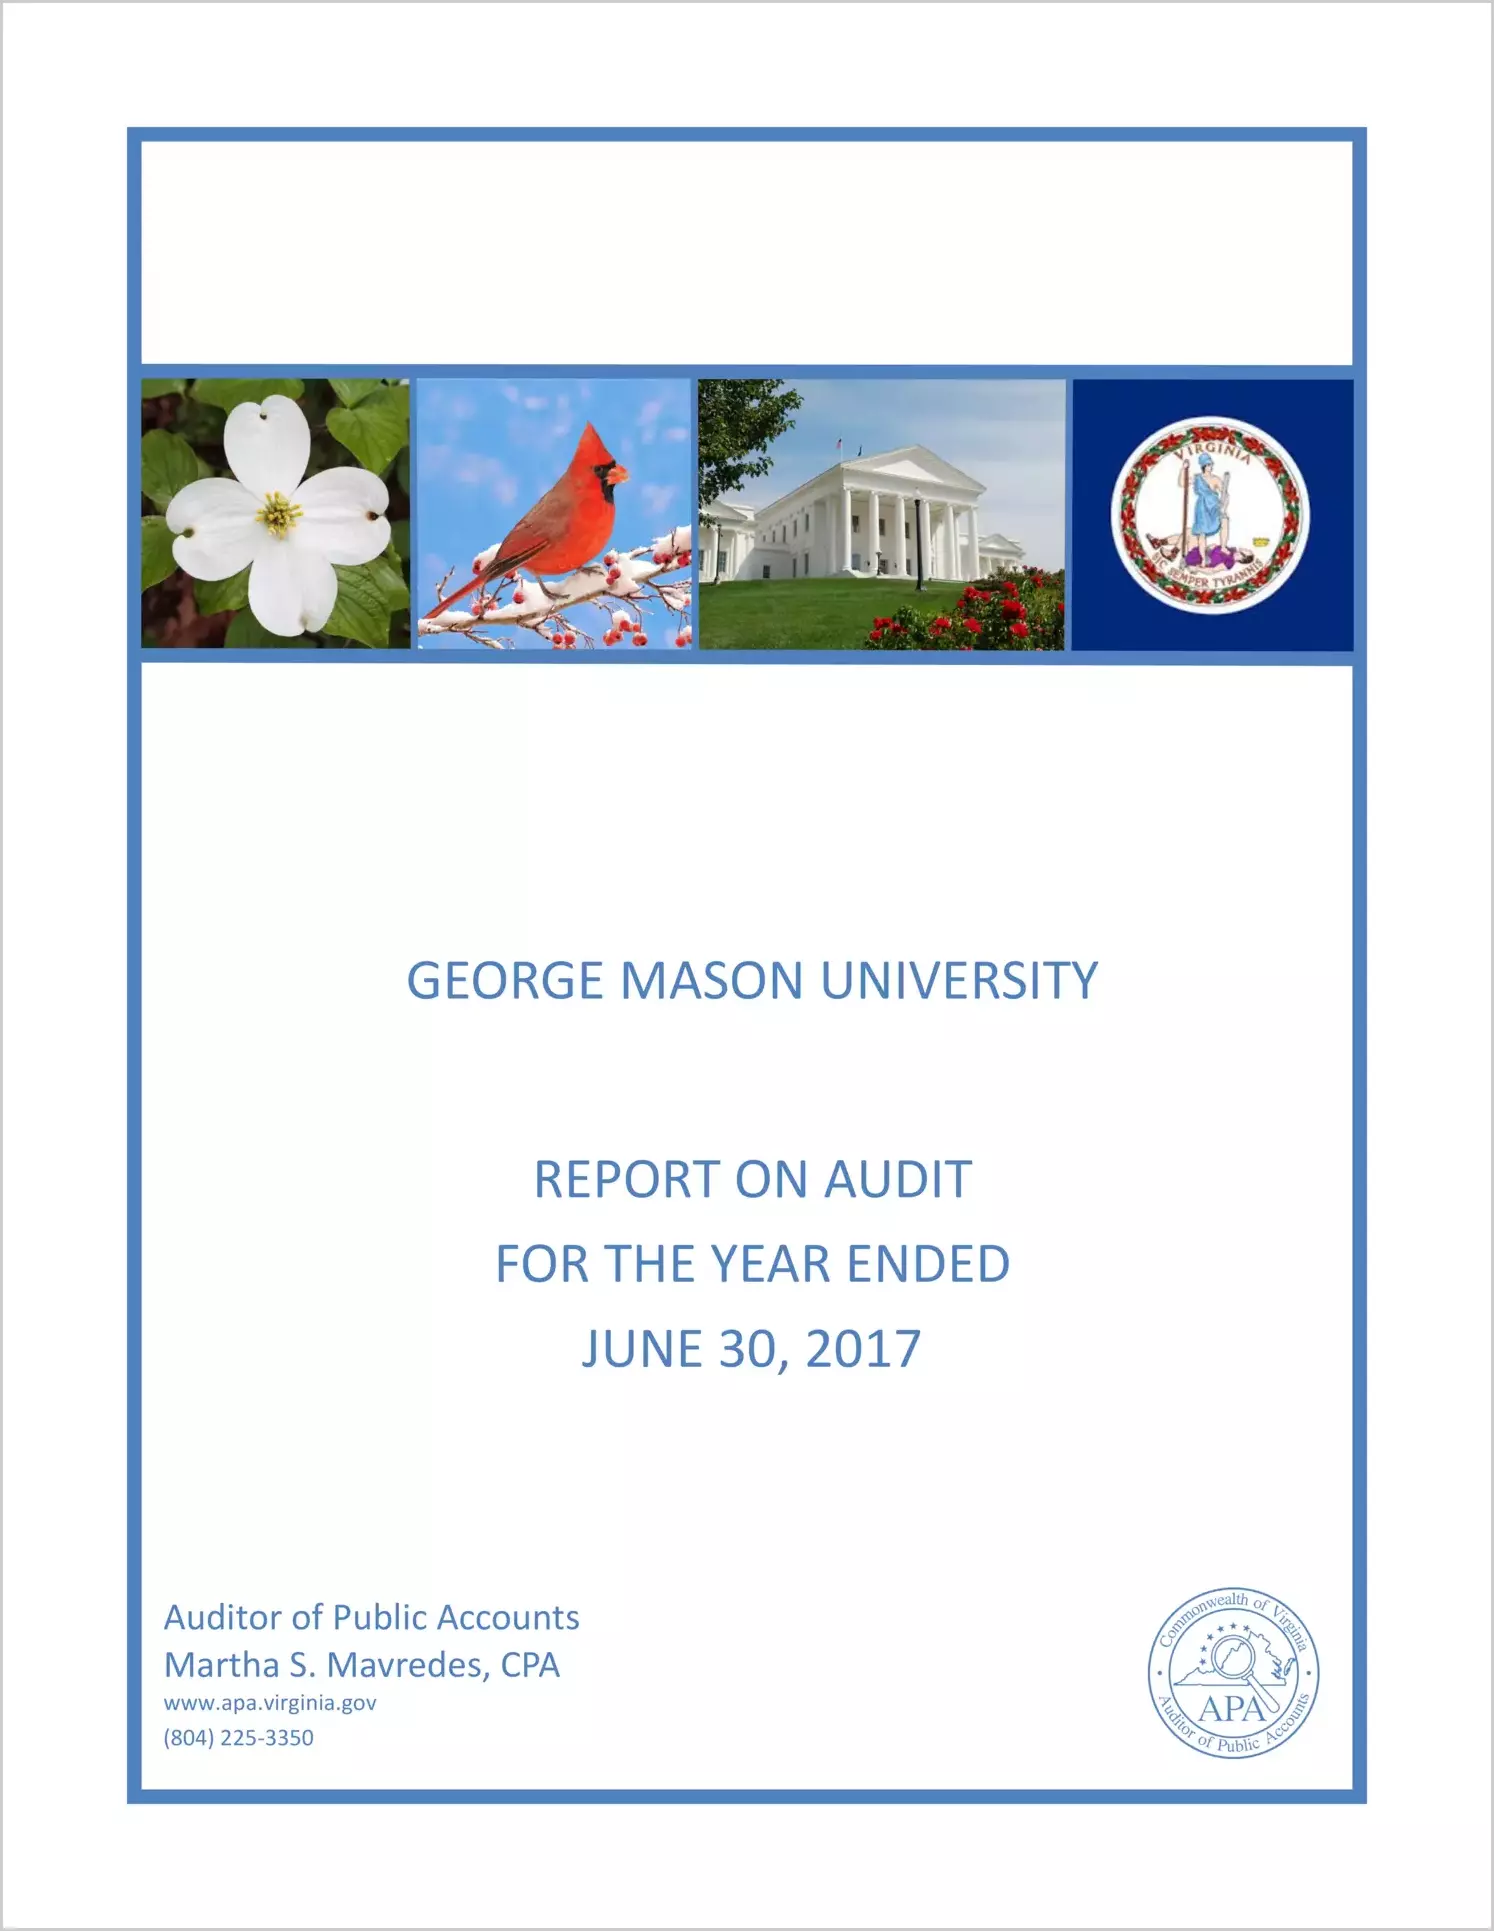 George Mason University for the year ended June 30, 2017